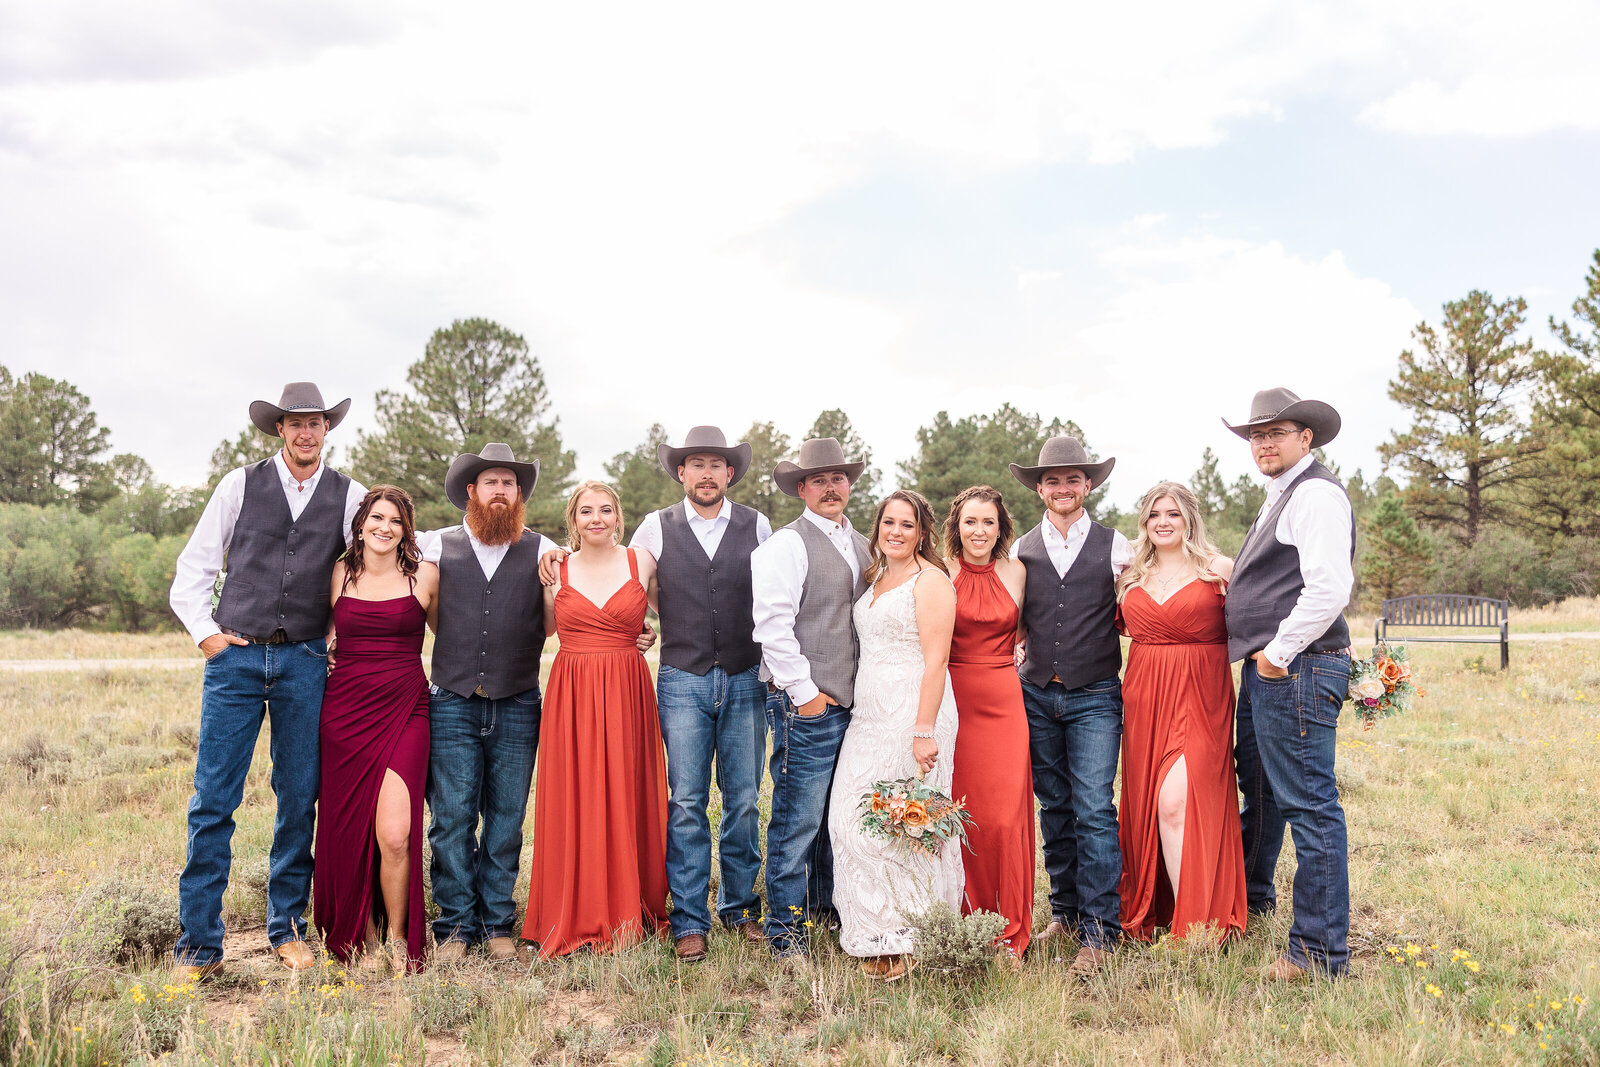 Bridesmaids and groomsmen pictures